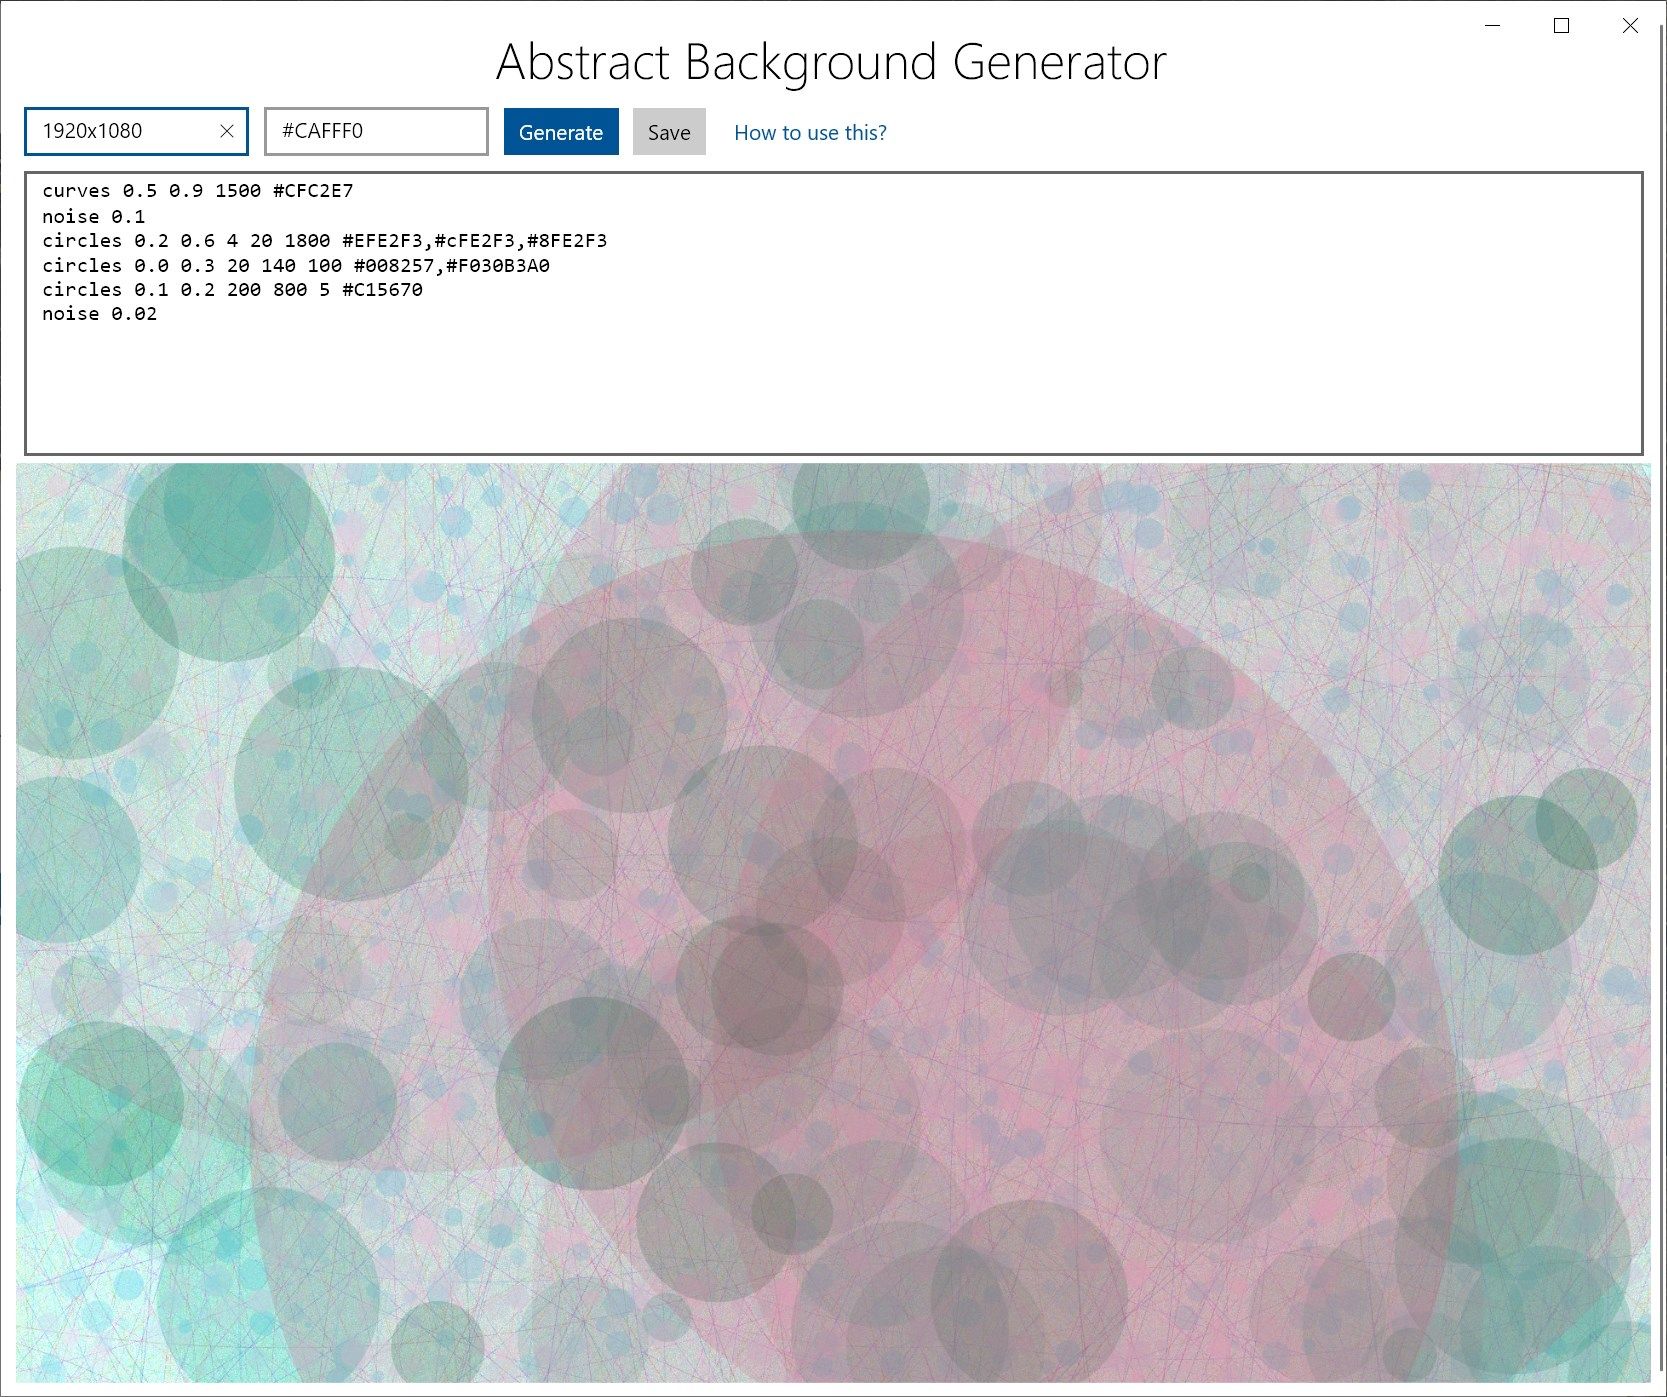 Abstract Background Generator